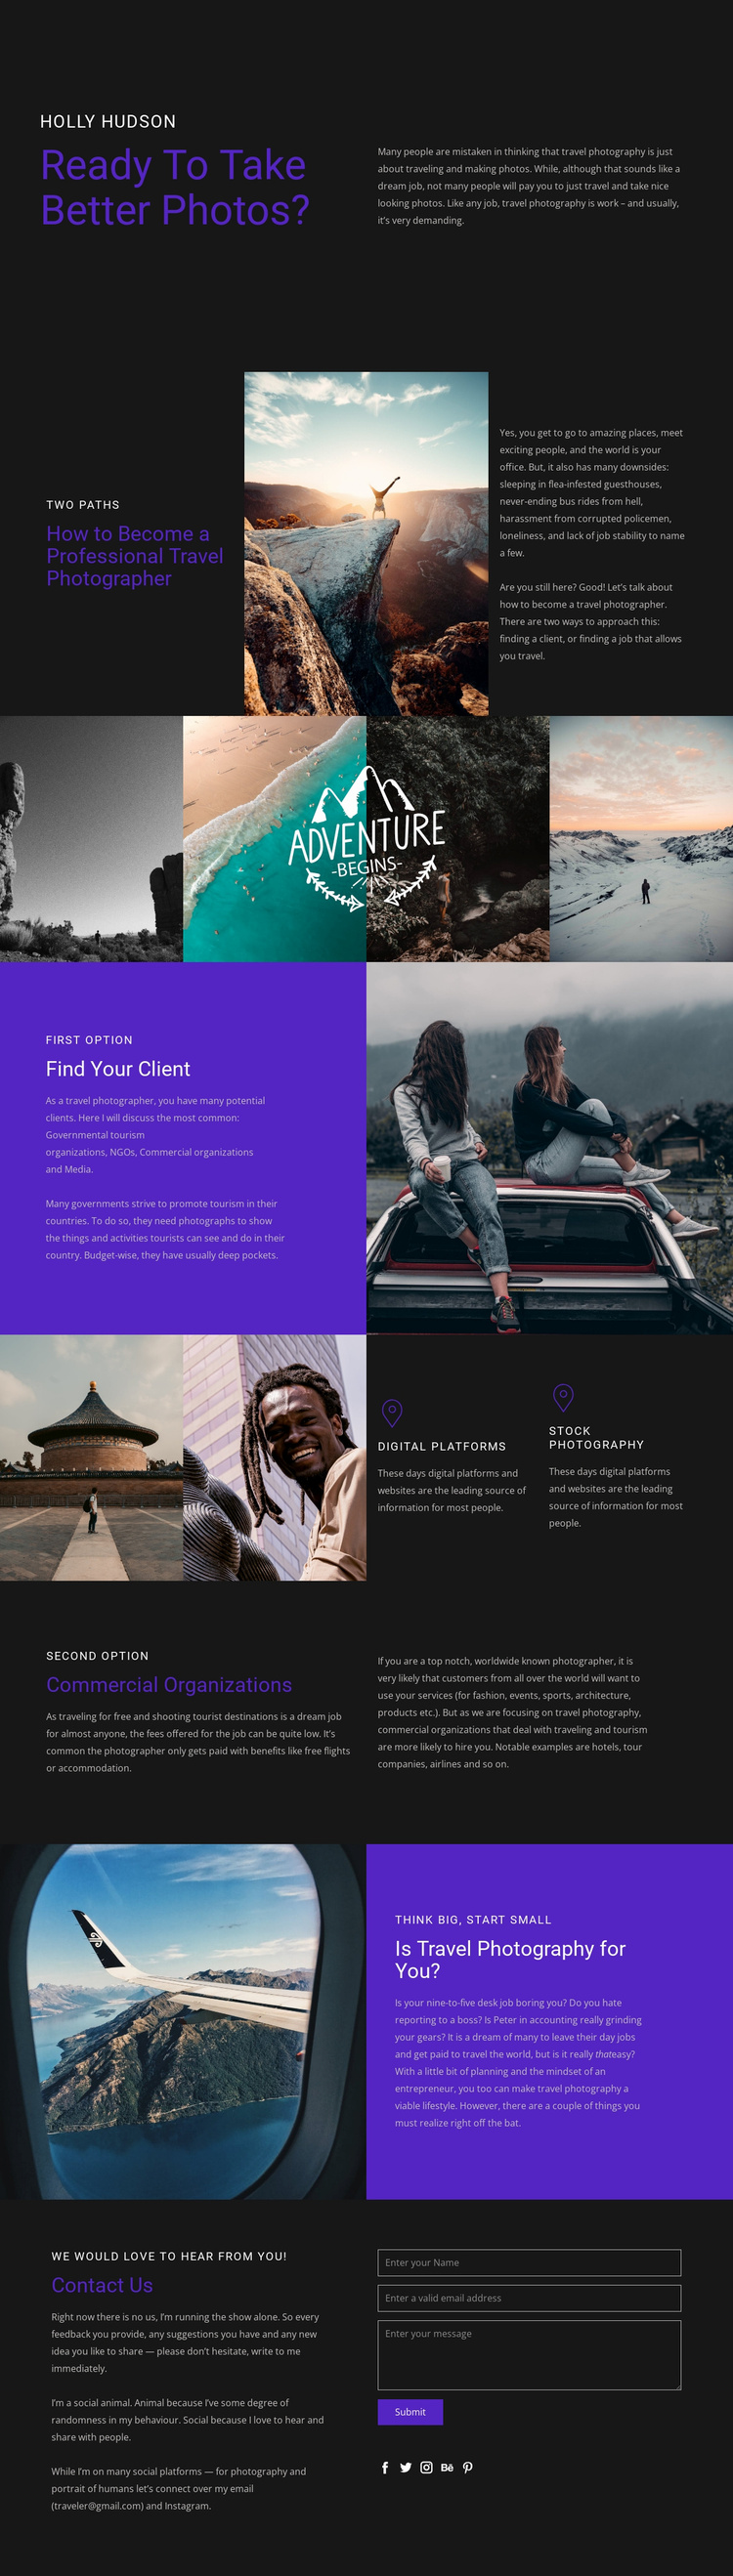 Travel and photography Ecommerce Website Design